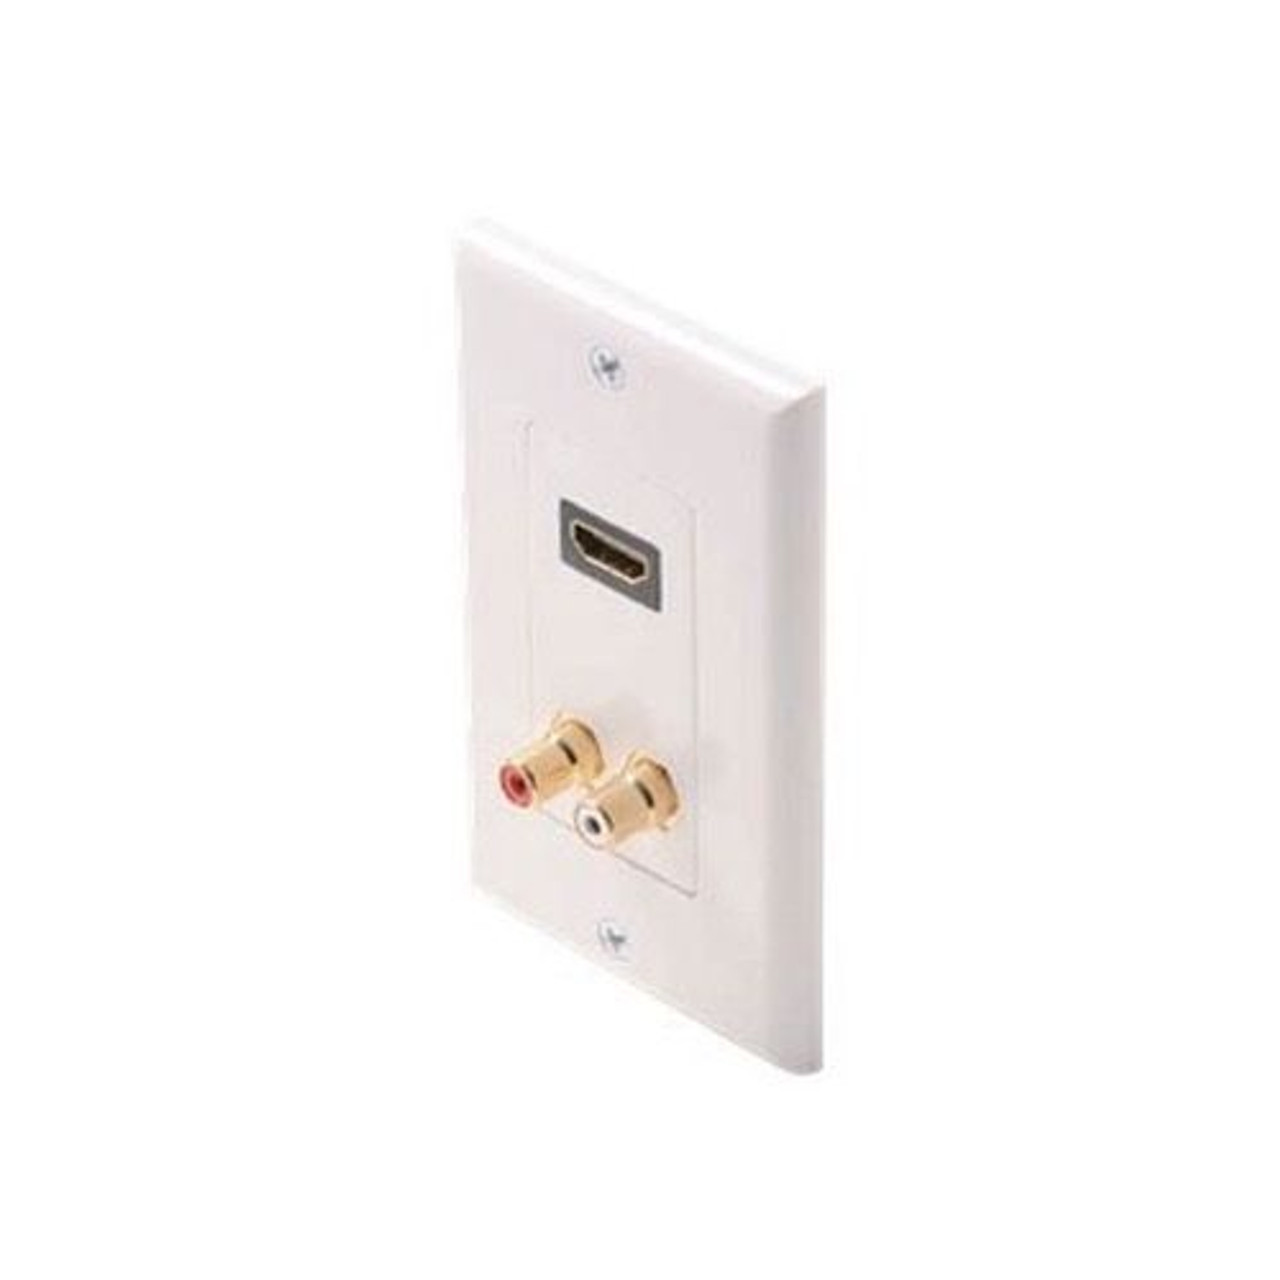 Steren 516-113WH HDMI Wall Plate White 2-RCA Jacks Red/White RCA Mono Audio F Gold Connector White Plate HDMI Female to HDMI Female, High Definition Multi-Media Interface HDTV Applications, Part # 516113-WH